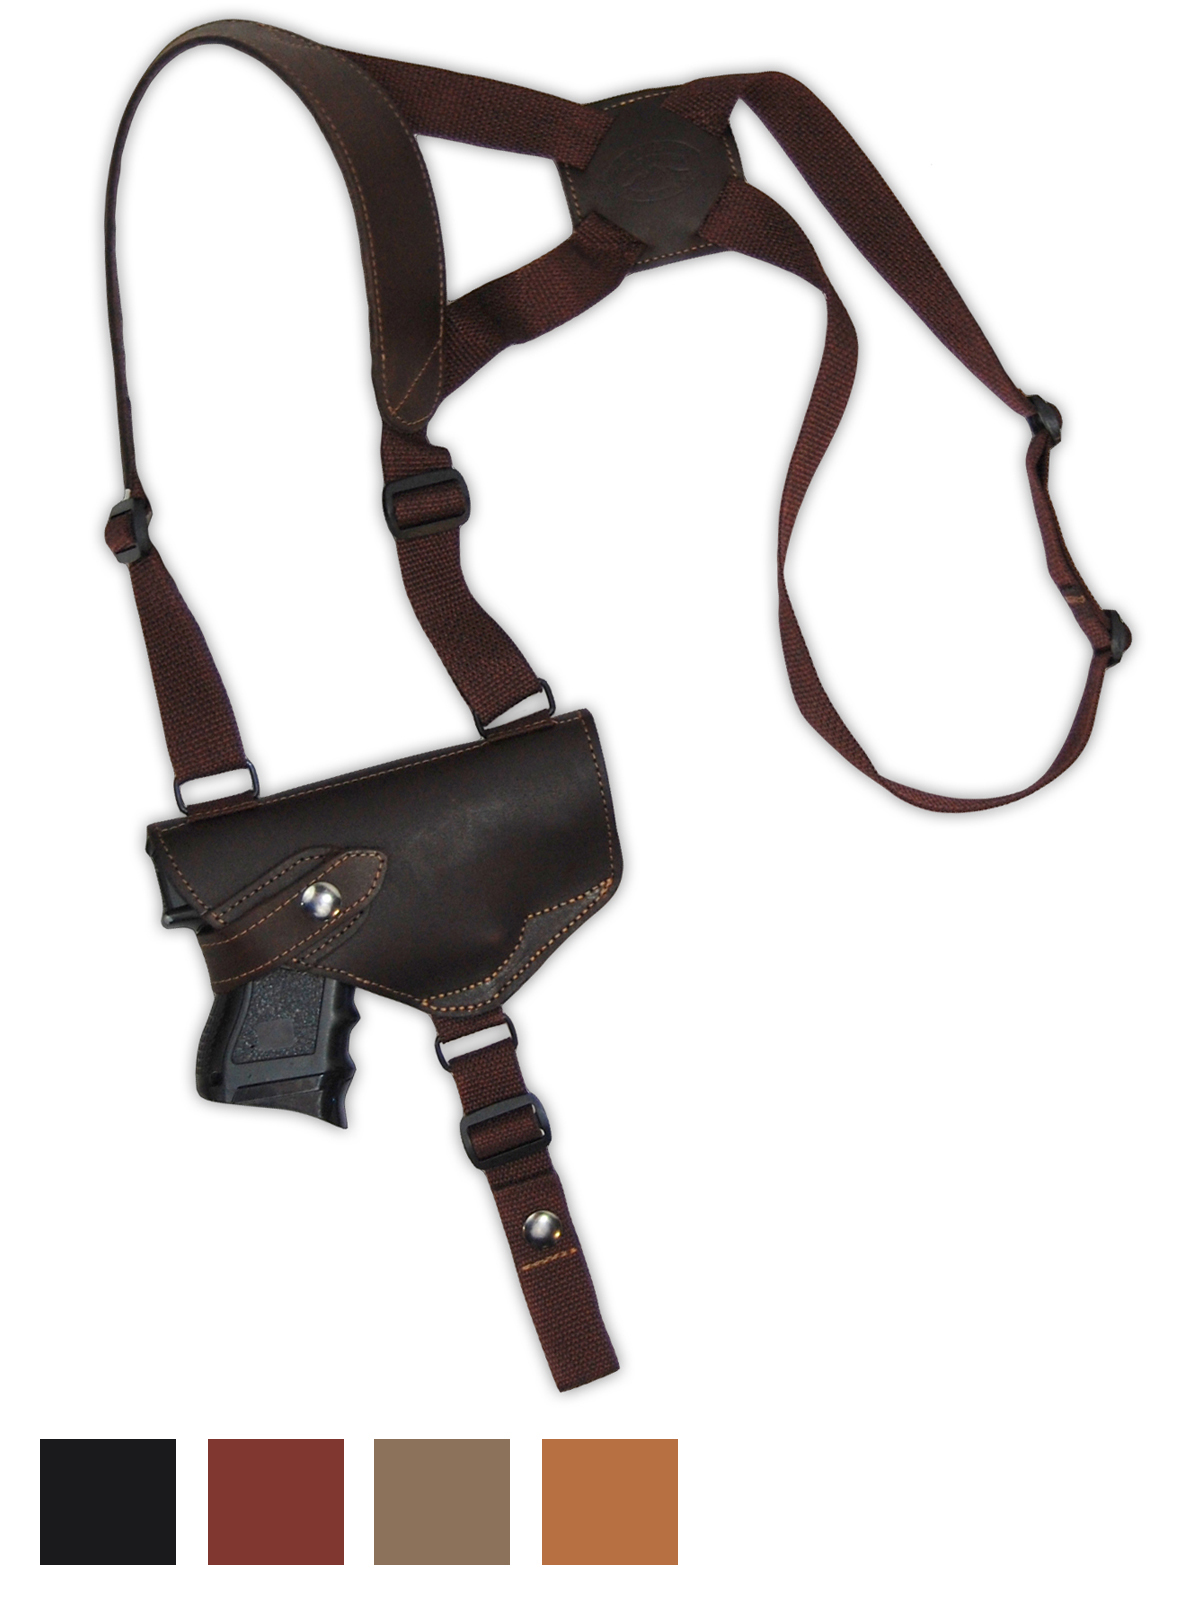 NEW Barsony Vertical Brown Leather Shoulder Holster Astra Beretta Full Size 9 40 